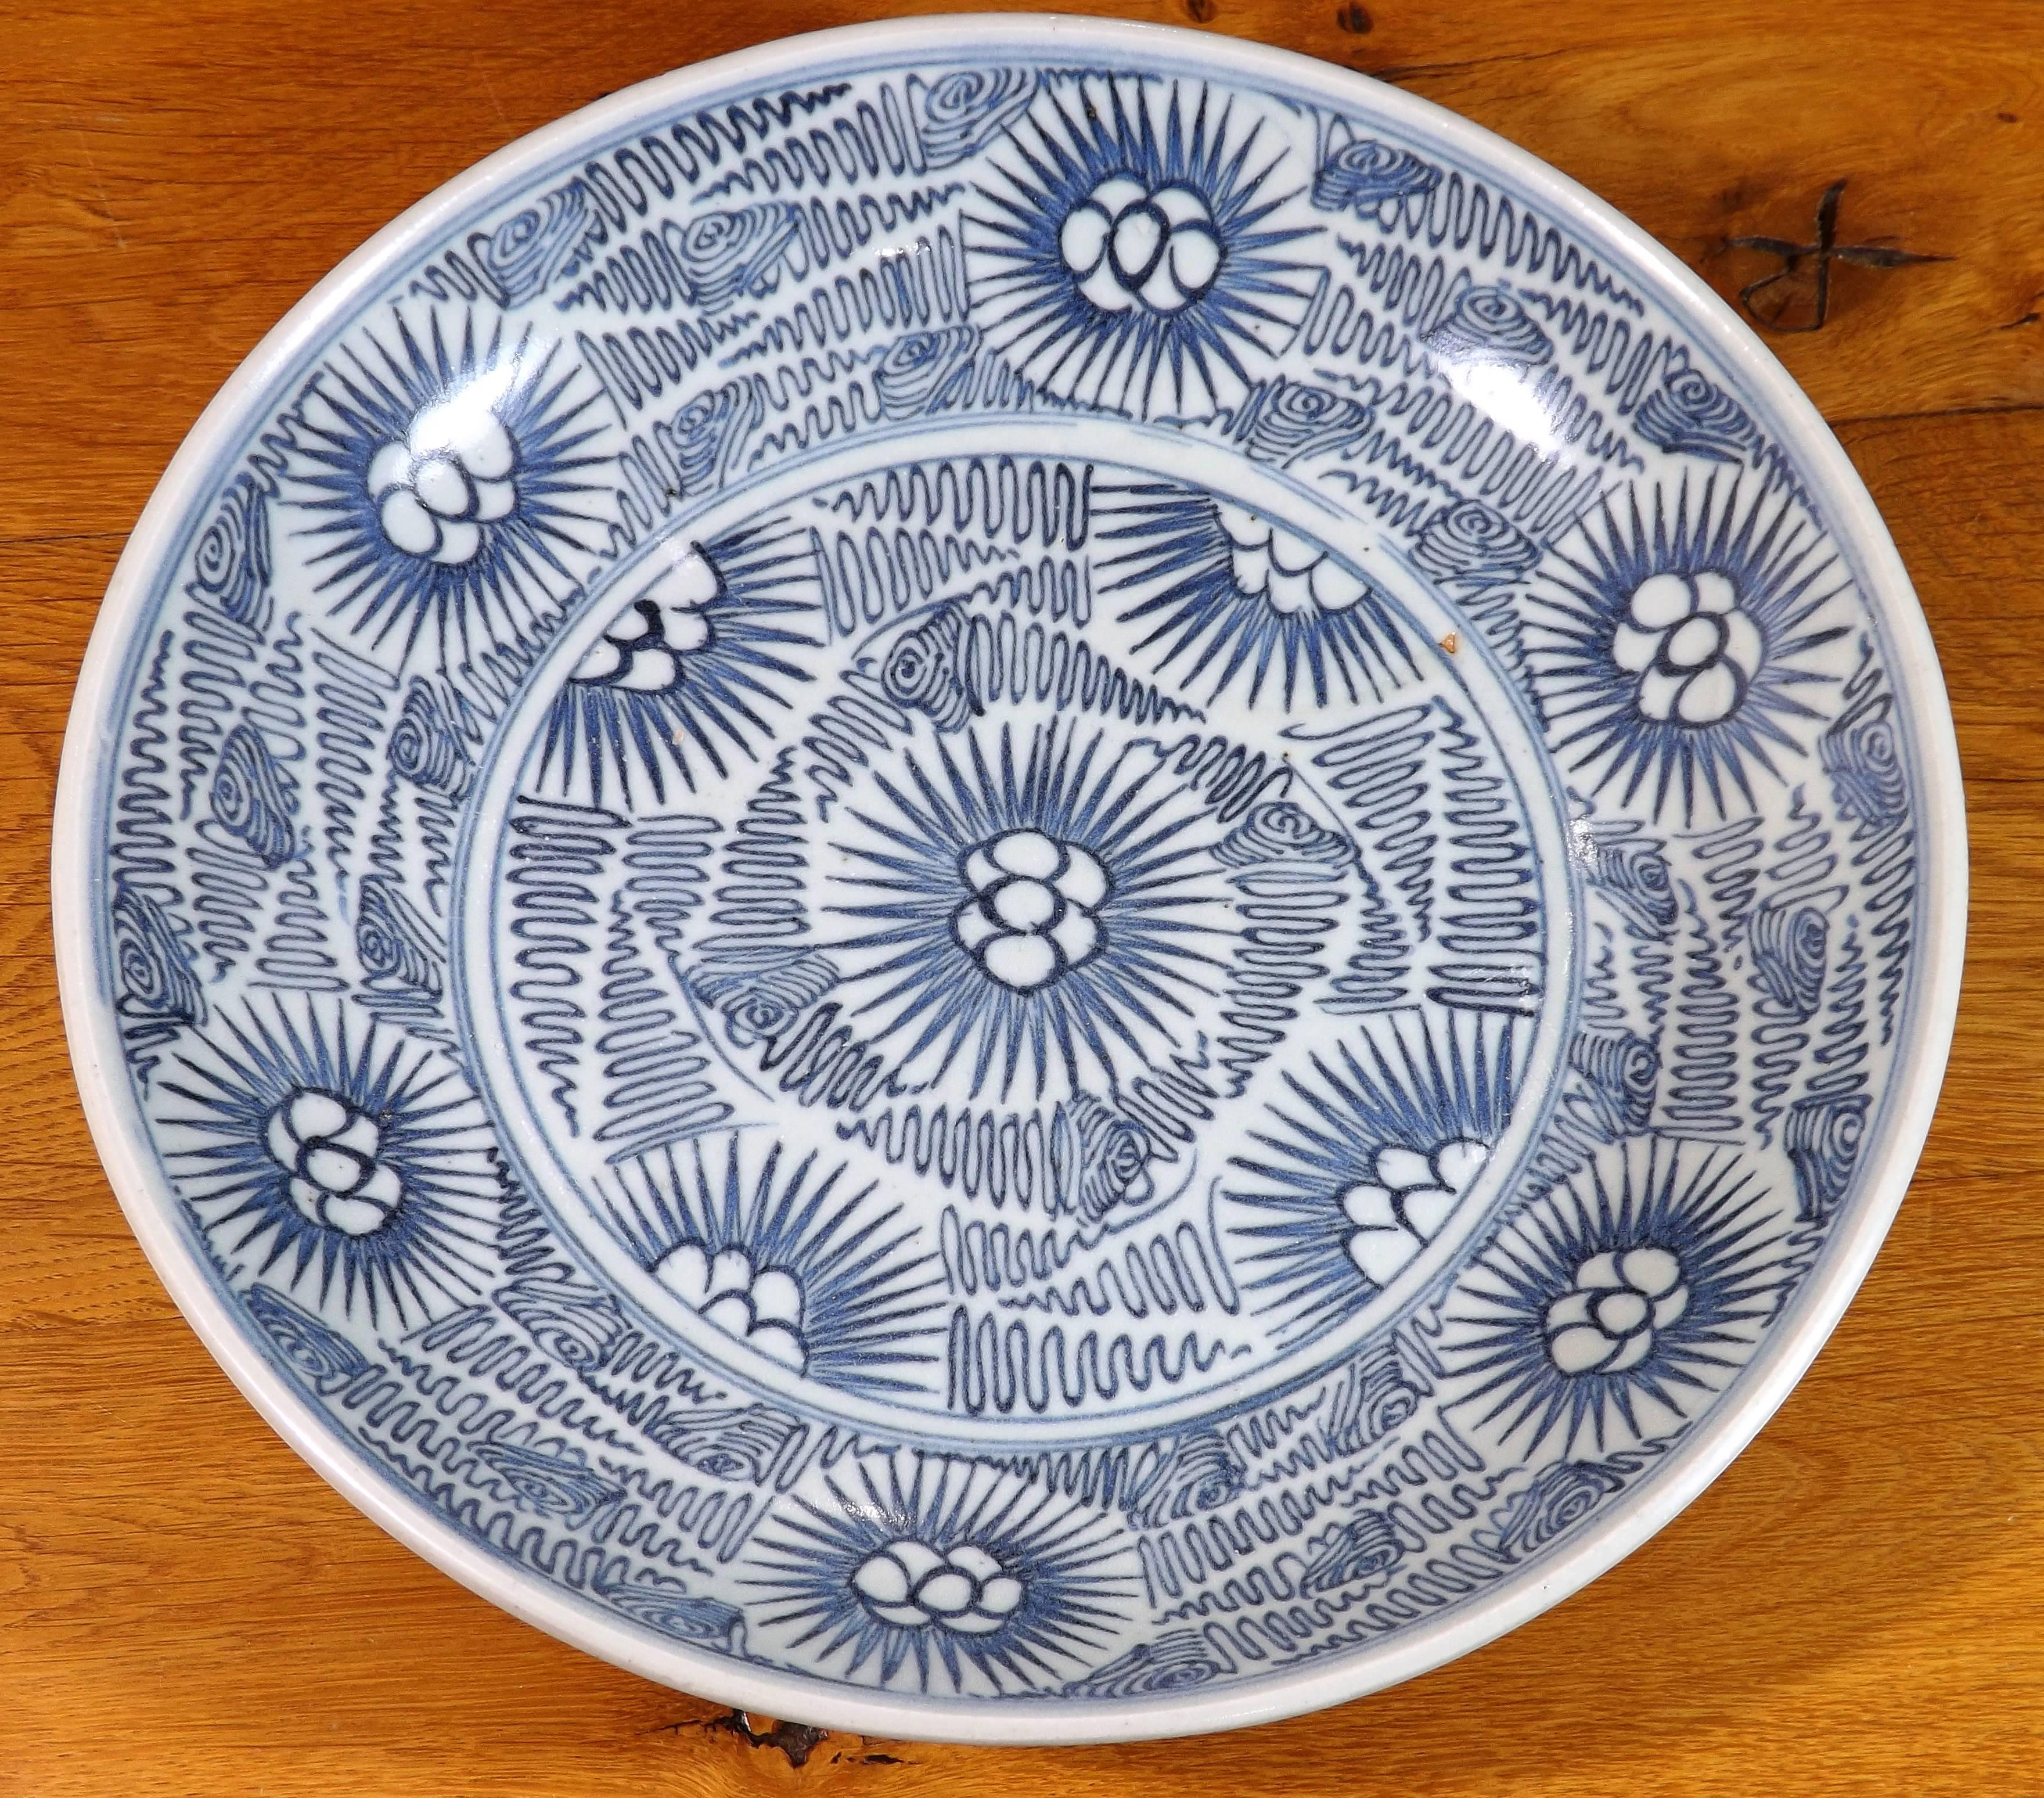 Eleven inch blue and white plate in the 